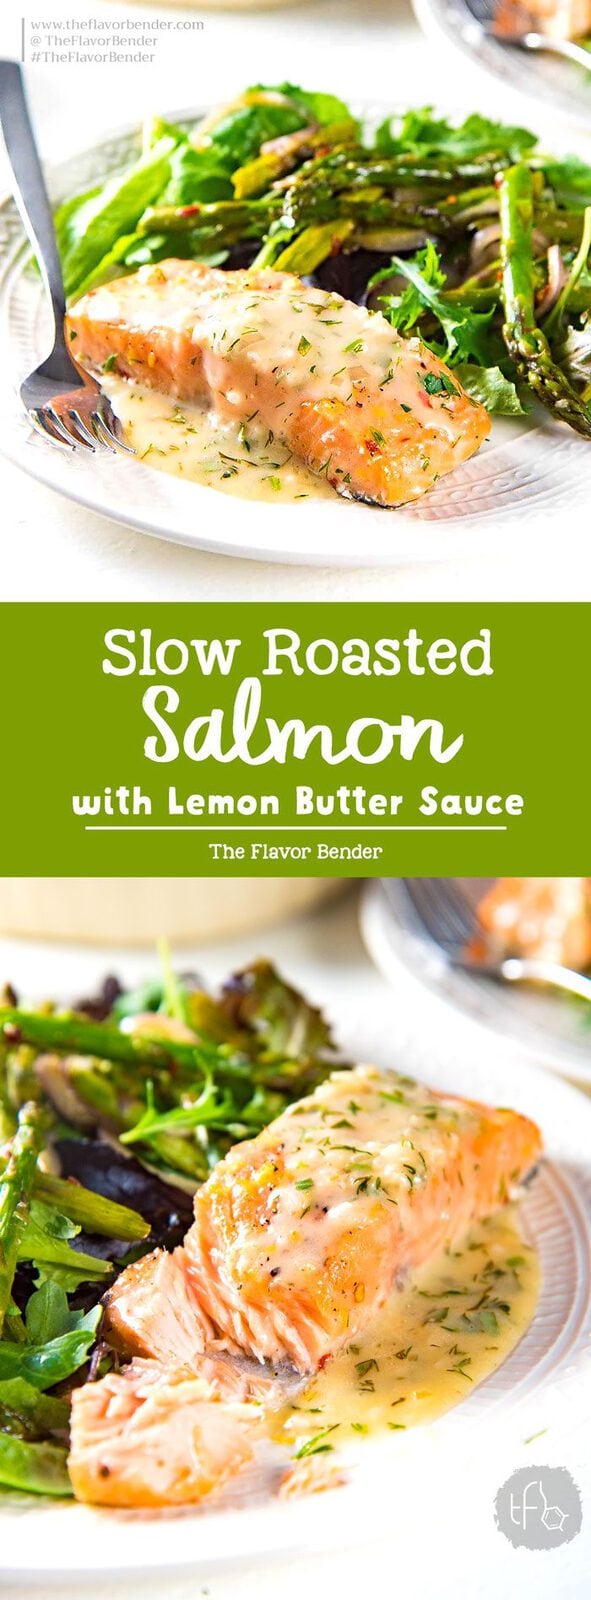 Buttery Lemon Slow Roasted Salmon with Lemon Butter Sauce - Perfectly cooked, juicy slow roasted Salmon with a buttery tangy sauce! Delicious and versatile for any meal and occasion. #SpringRecipes #SeafoodRecipes #SalmonRecipes #SeafoodBrunch #LightLunch